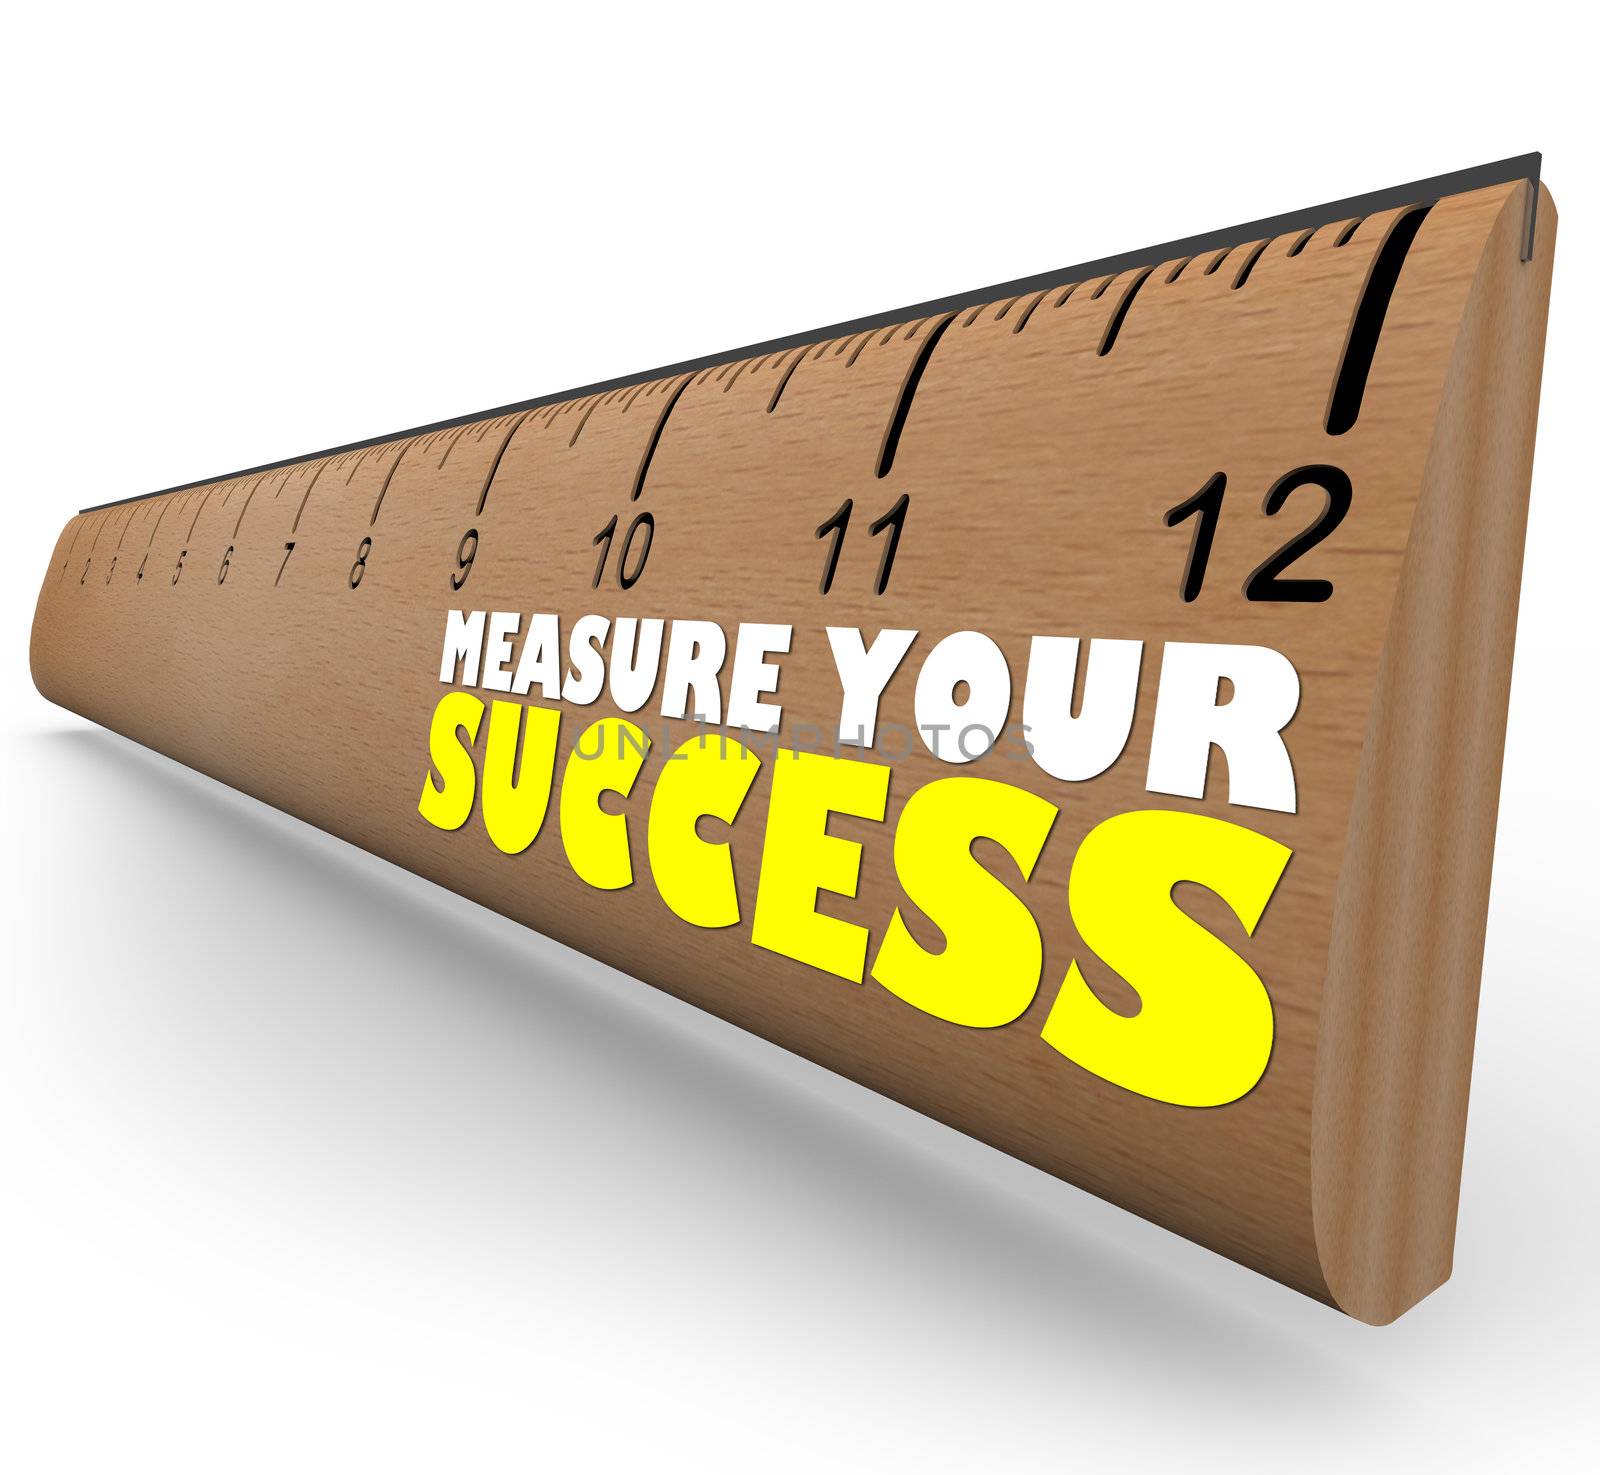 Measure Your Growth Ruler to Review and Assess Progress to Goal by iQoncept